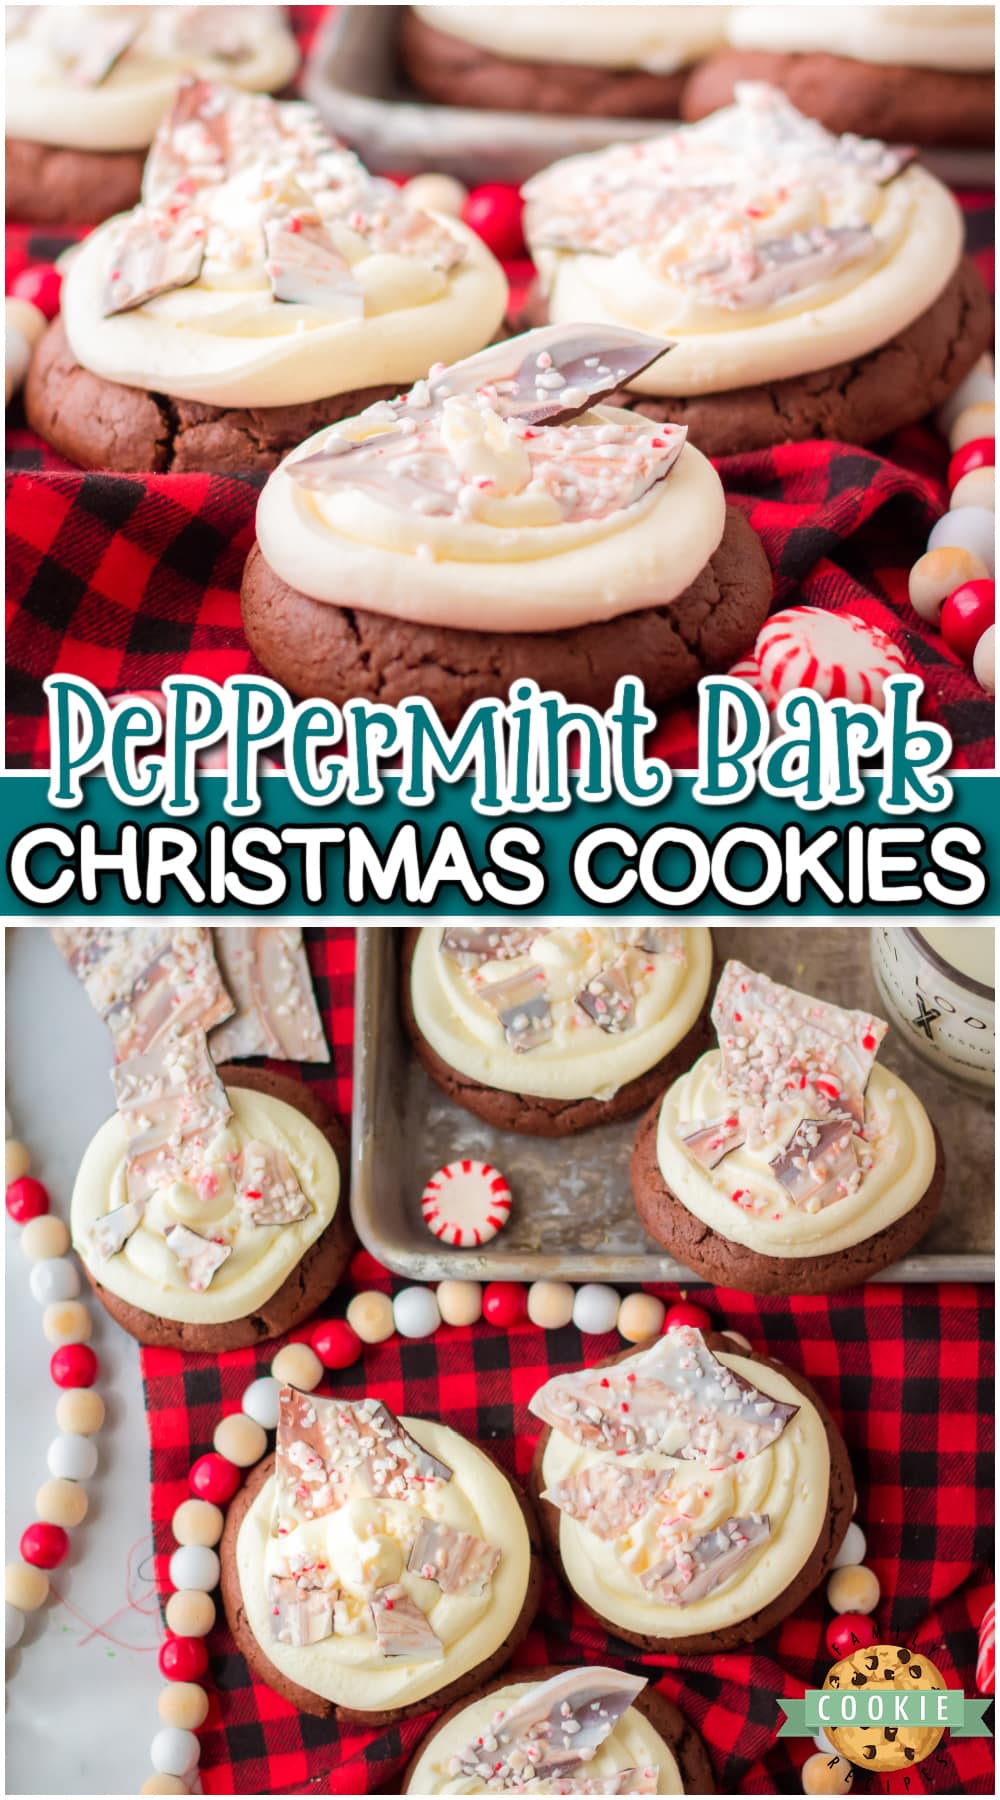 Peppermint Bark Cookies are the ultimate Christmas cookies, a sensational holiday dessert! These peppermint cookies are bakery-style chocolate cookies topped with peppermint buttercream & homemade peppermint bark!  via @buttergirls